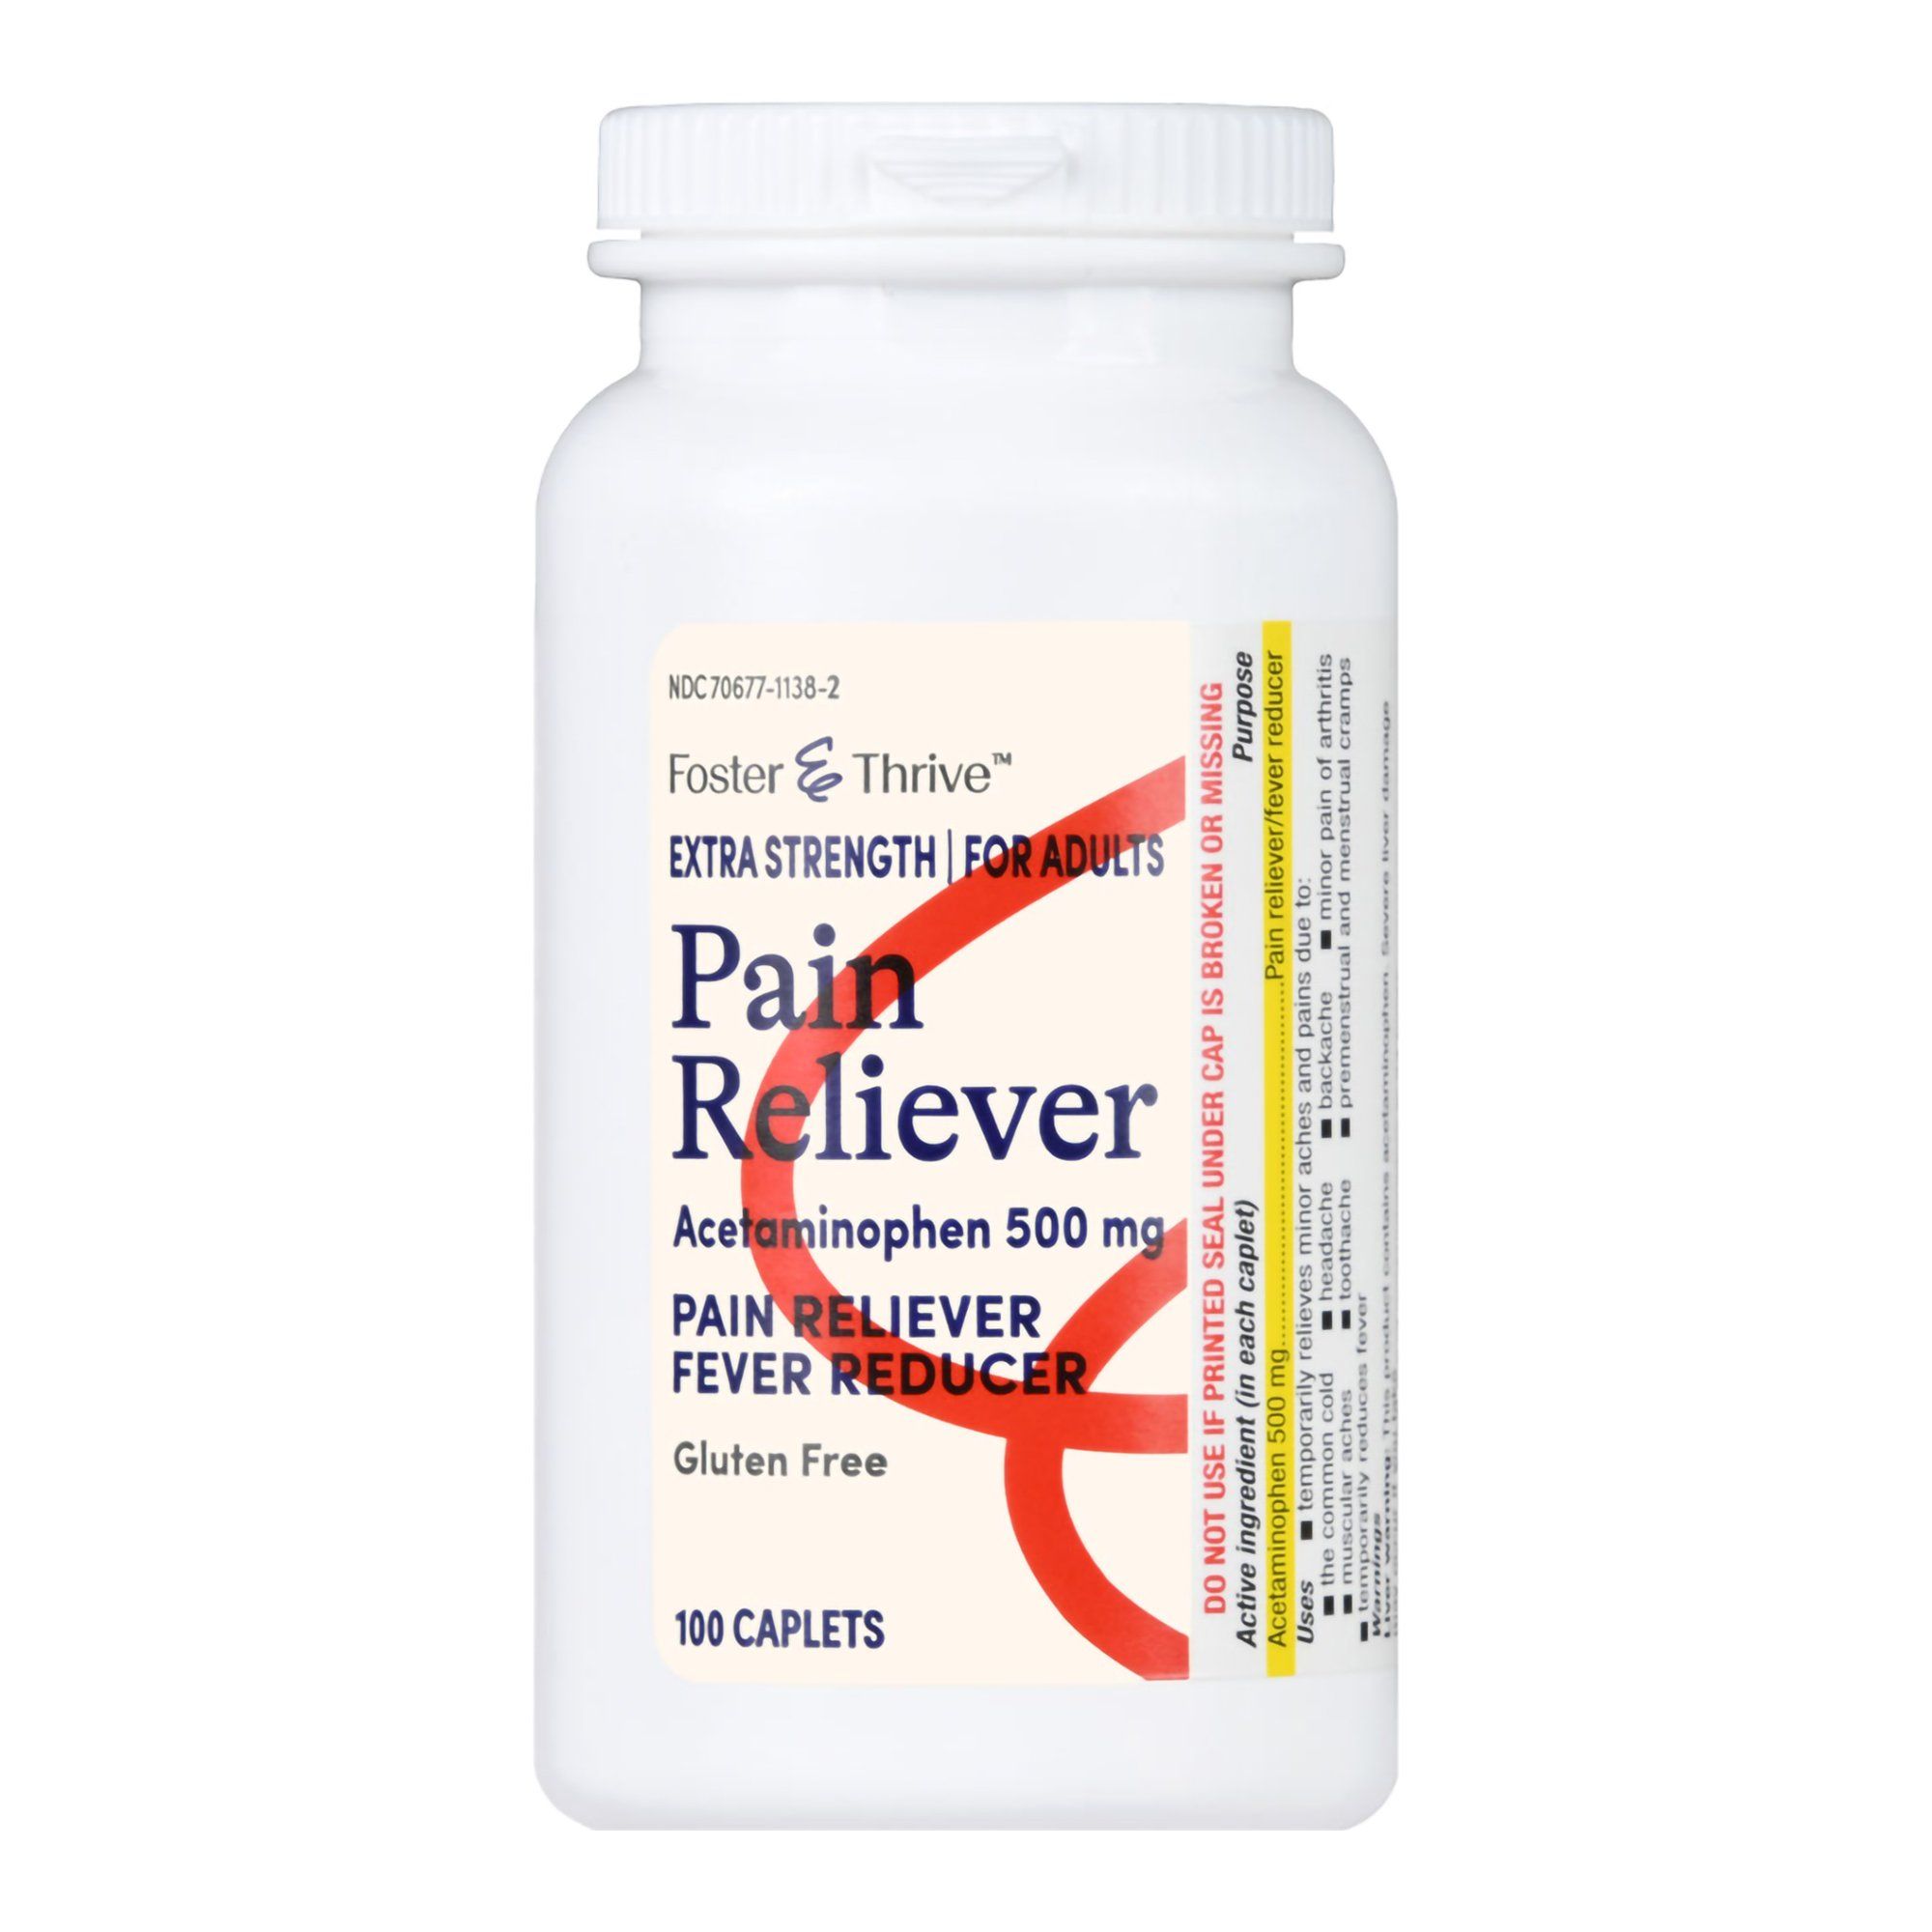 Foster & Thrive Extra Strength Pain Reliever Acetaminophen Caplets,  500 mg -  100 ct